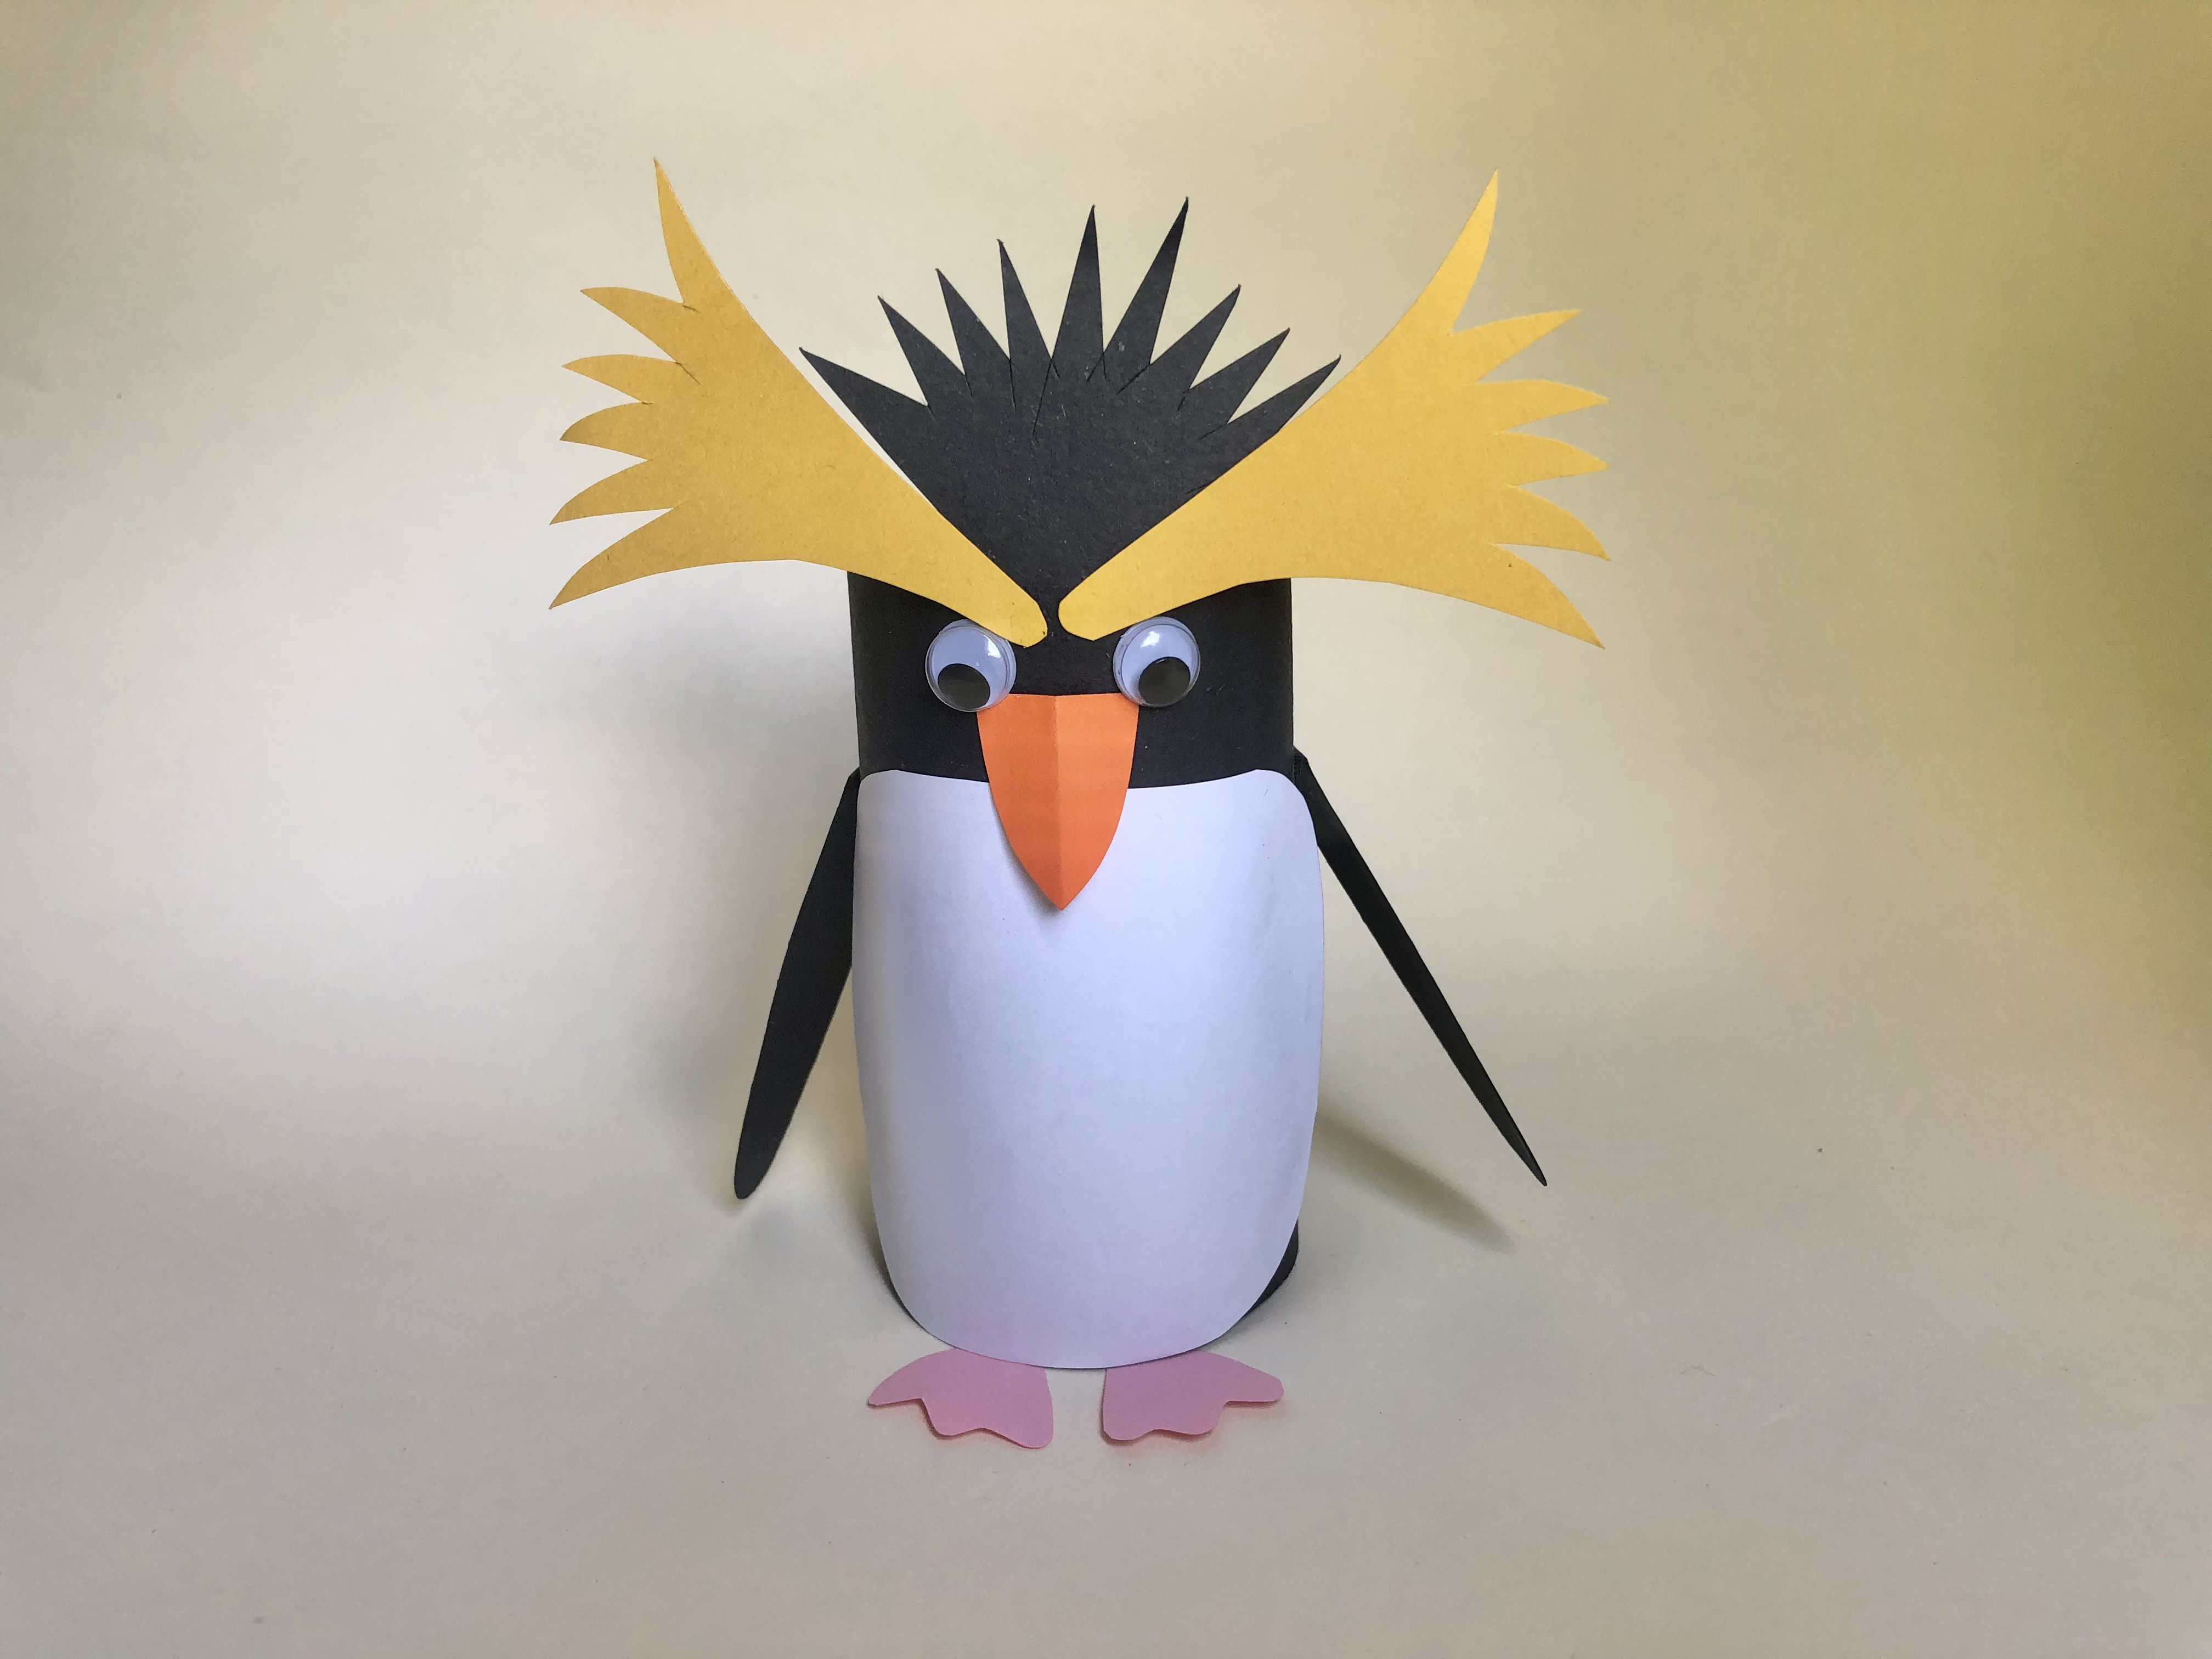 How to Create a Penguin Step 6: Finally, glue the yellow top feather shapes and black feather shape to the penguin.